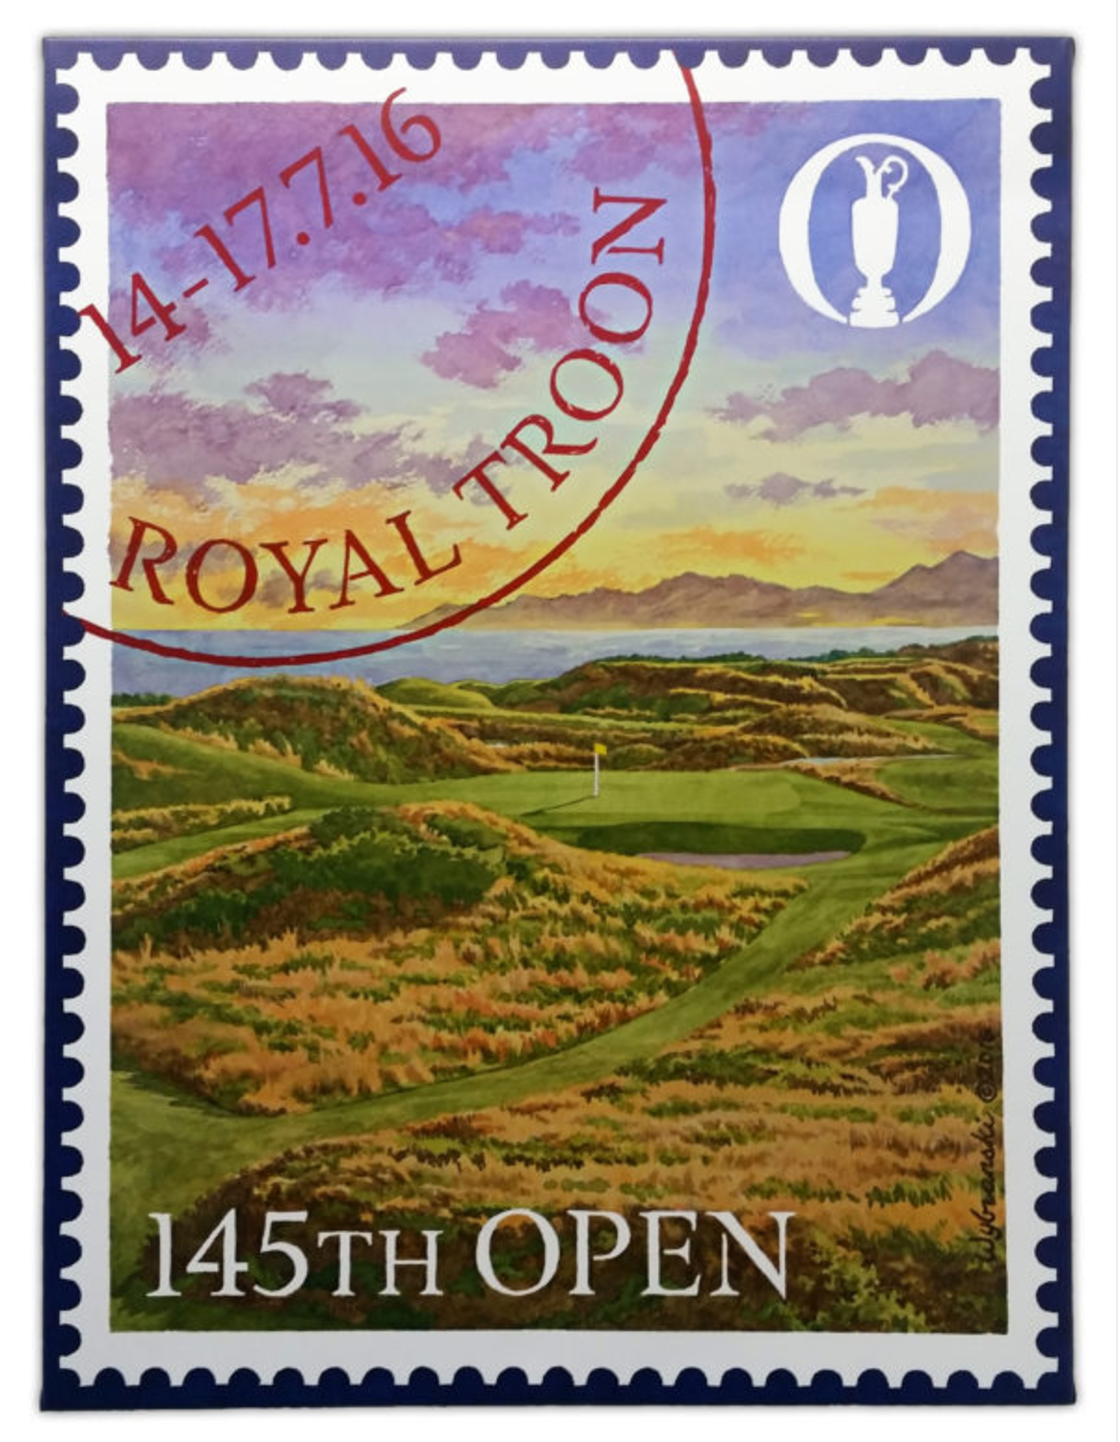 The Open Royal Troon 2016